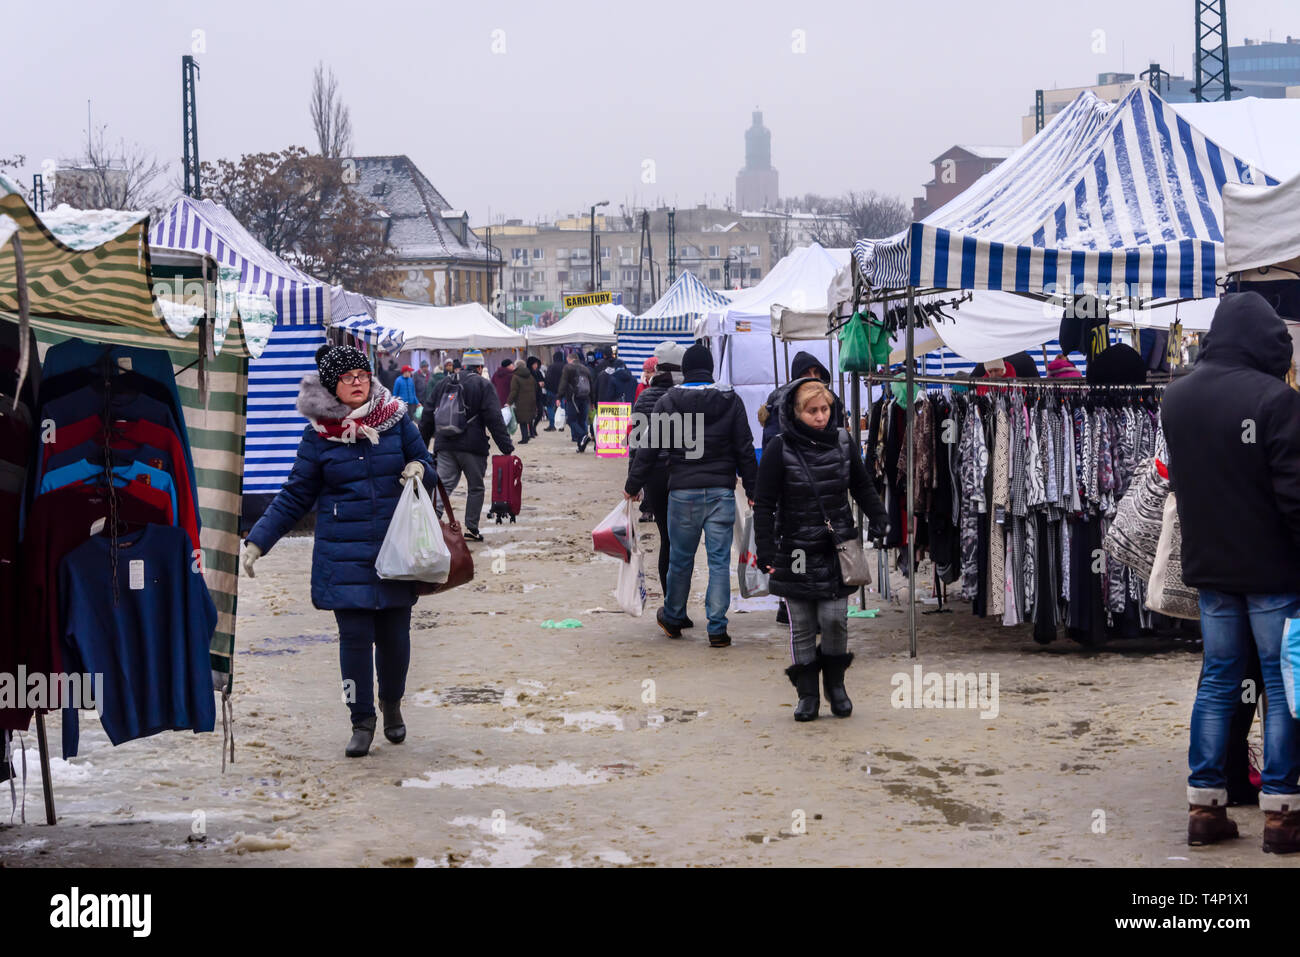 Customers walk through puddles and mud in an outdoor market, Wroclaw, Poland. Stock Photo